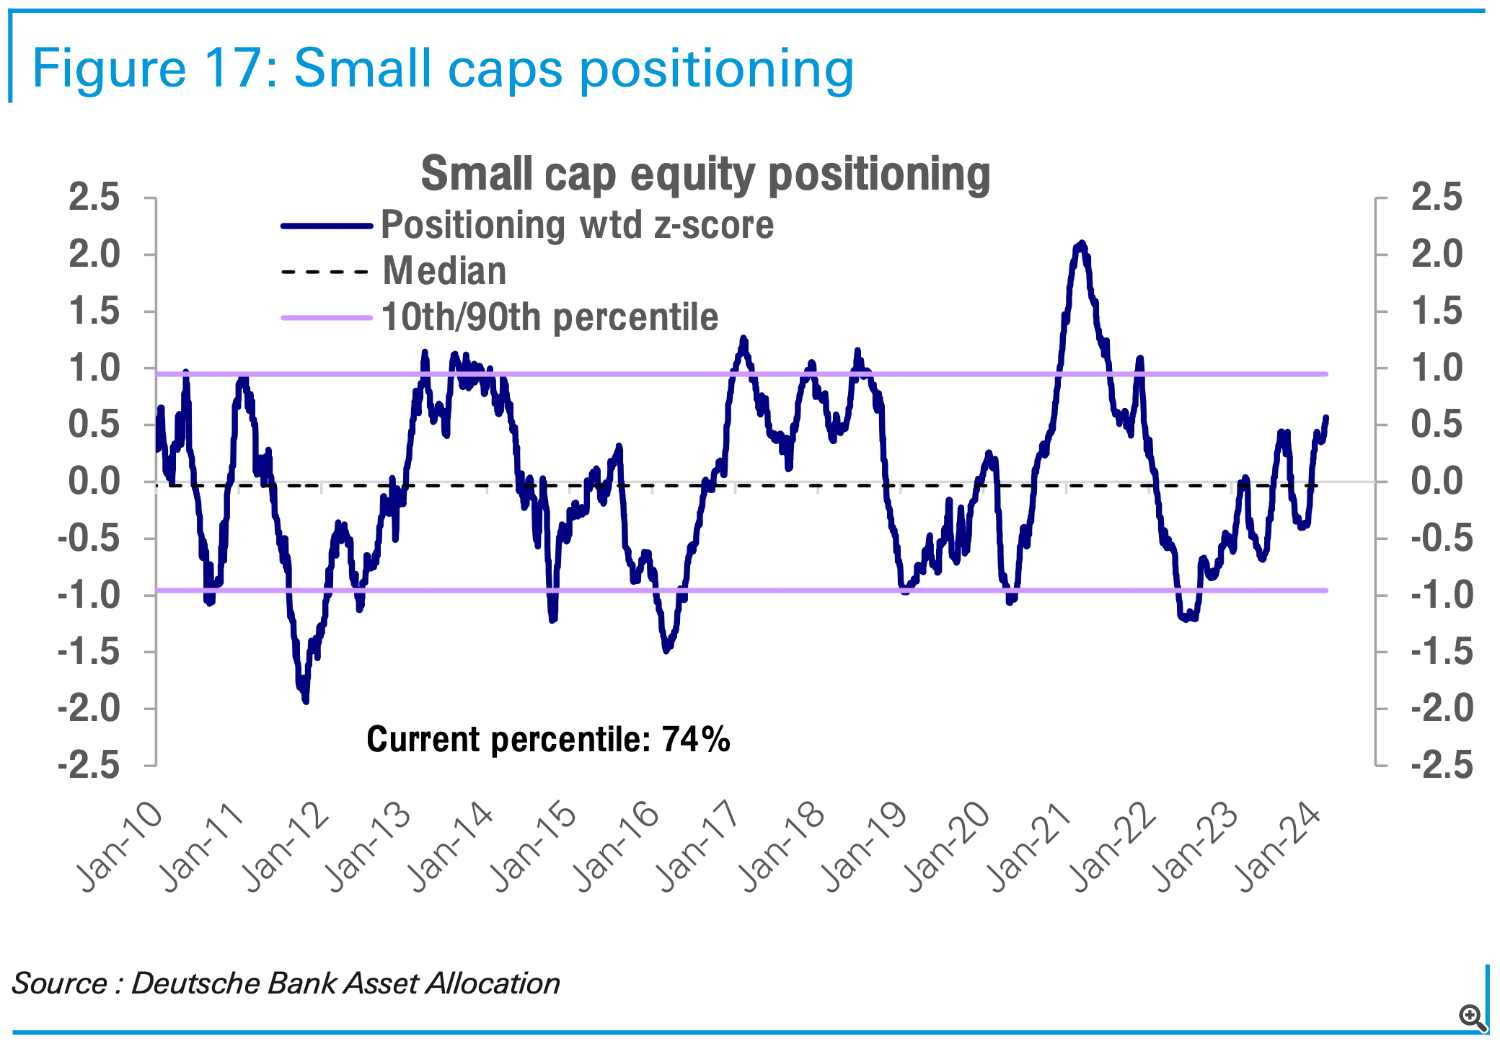 Positioning in small cap stocks